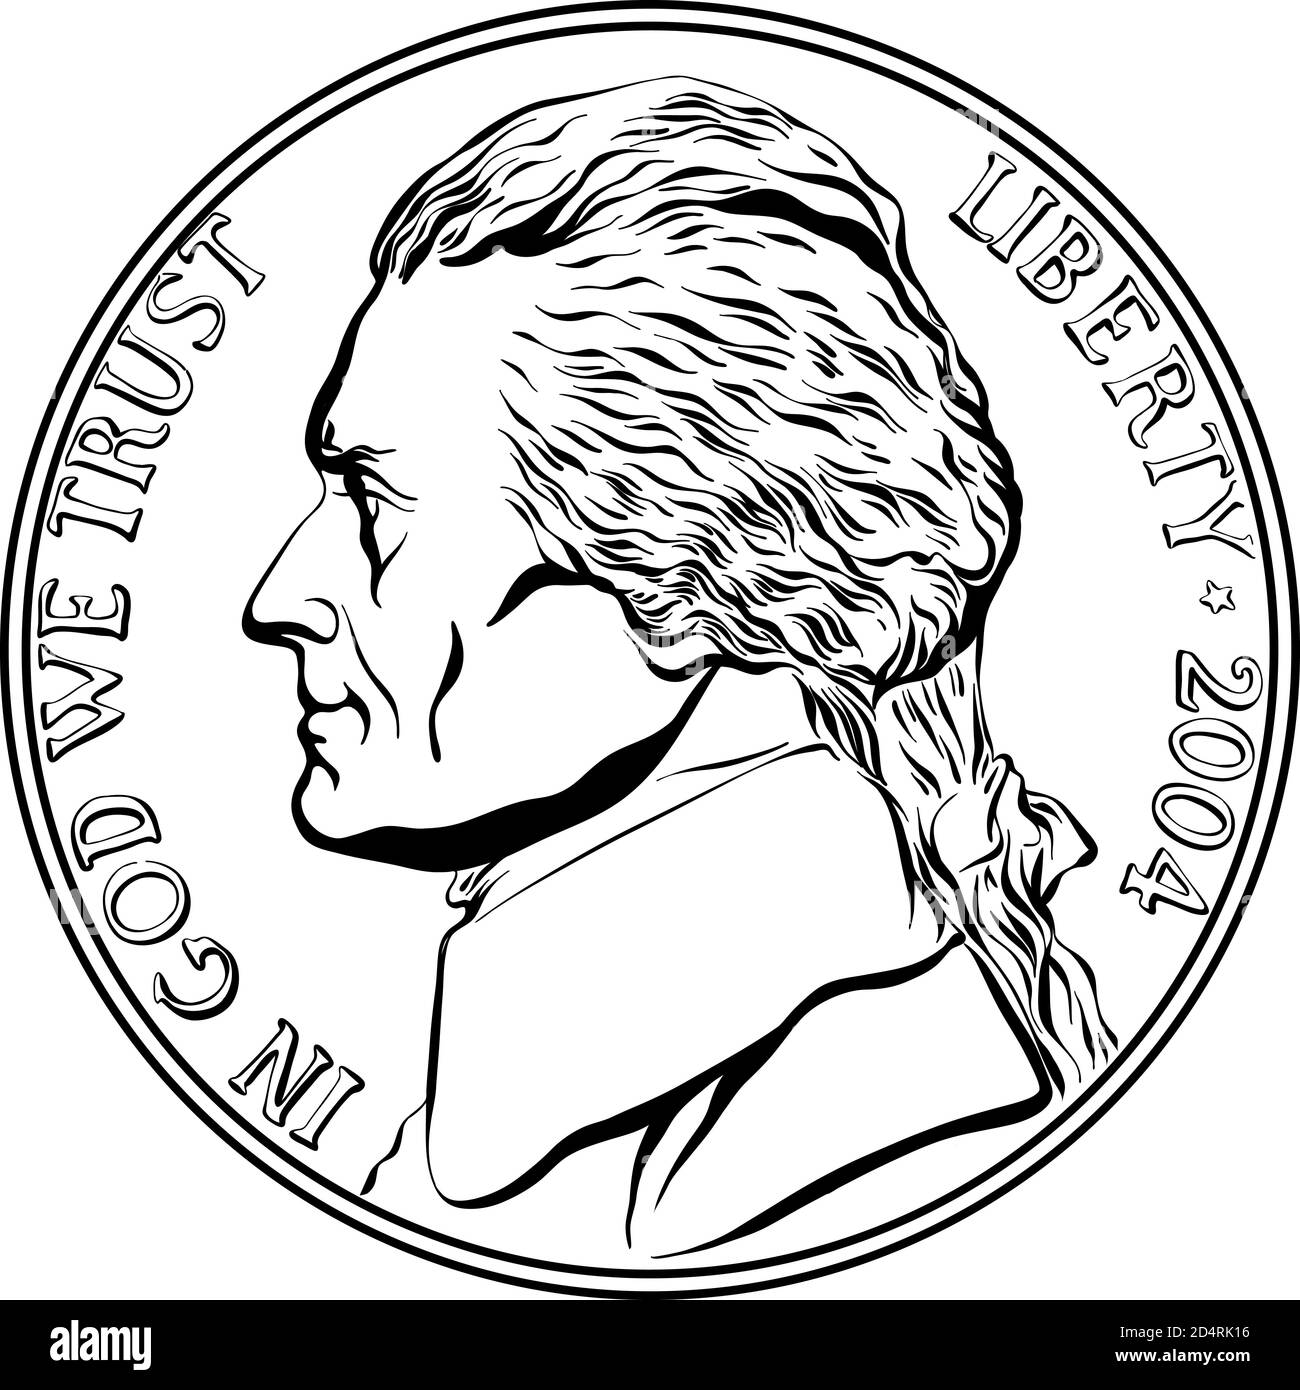 Jefferson nickel, American money, United States five-cent coin with Jefferson, third President of USA on obverse. Black and white image Stock Vector